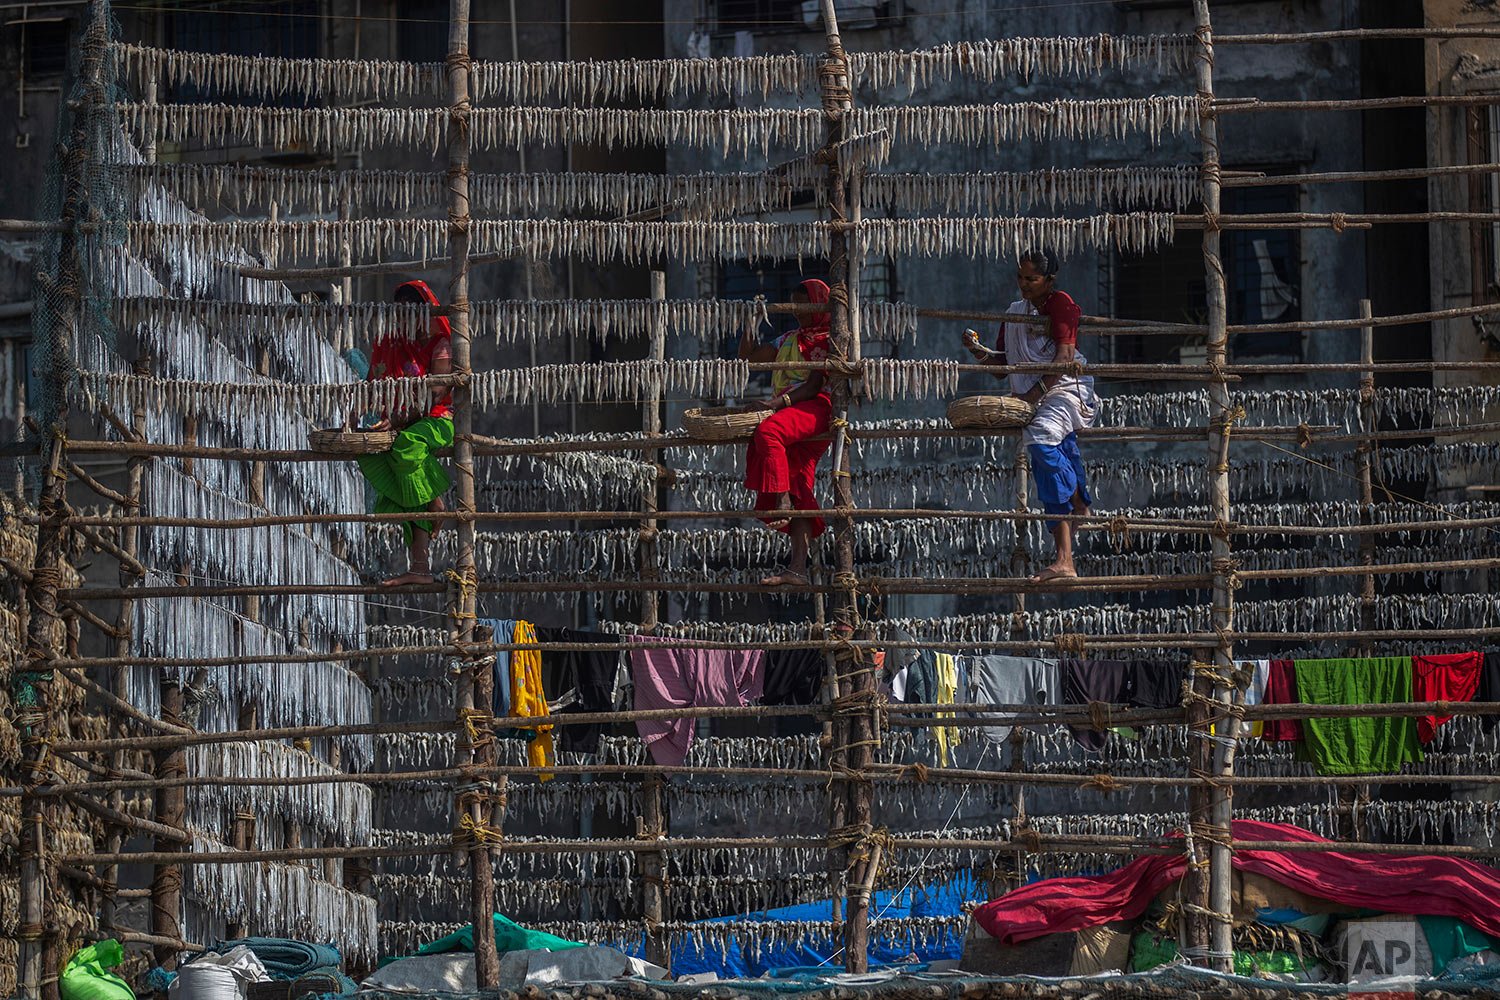  Fisherwomen hang fish on a structure made of bamboo poles to sun dry them at a fishing colony in Mumbai, India, Wednesday, Dec. 29, 2021. (AP Photo/Rafiq Maqbool) 